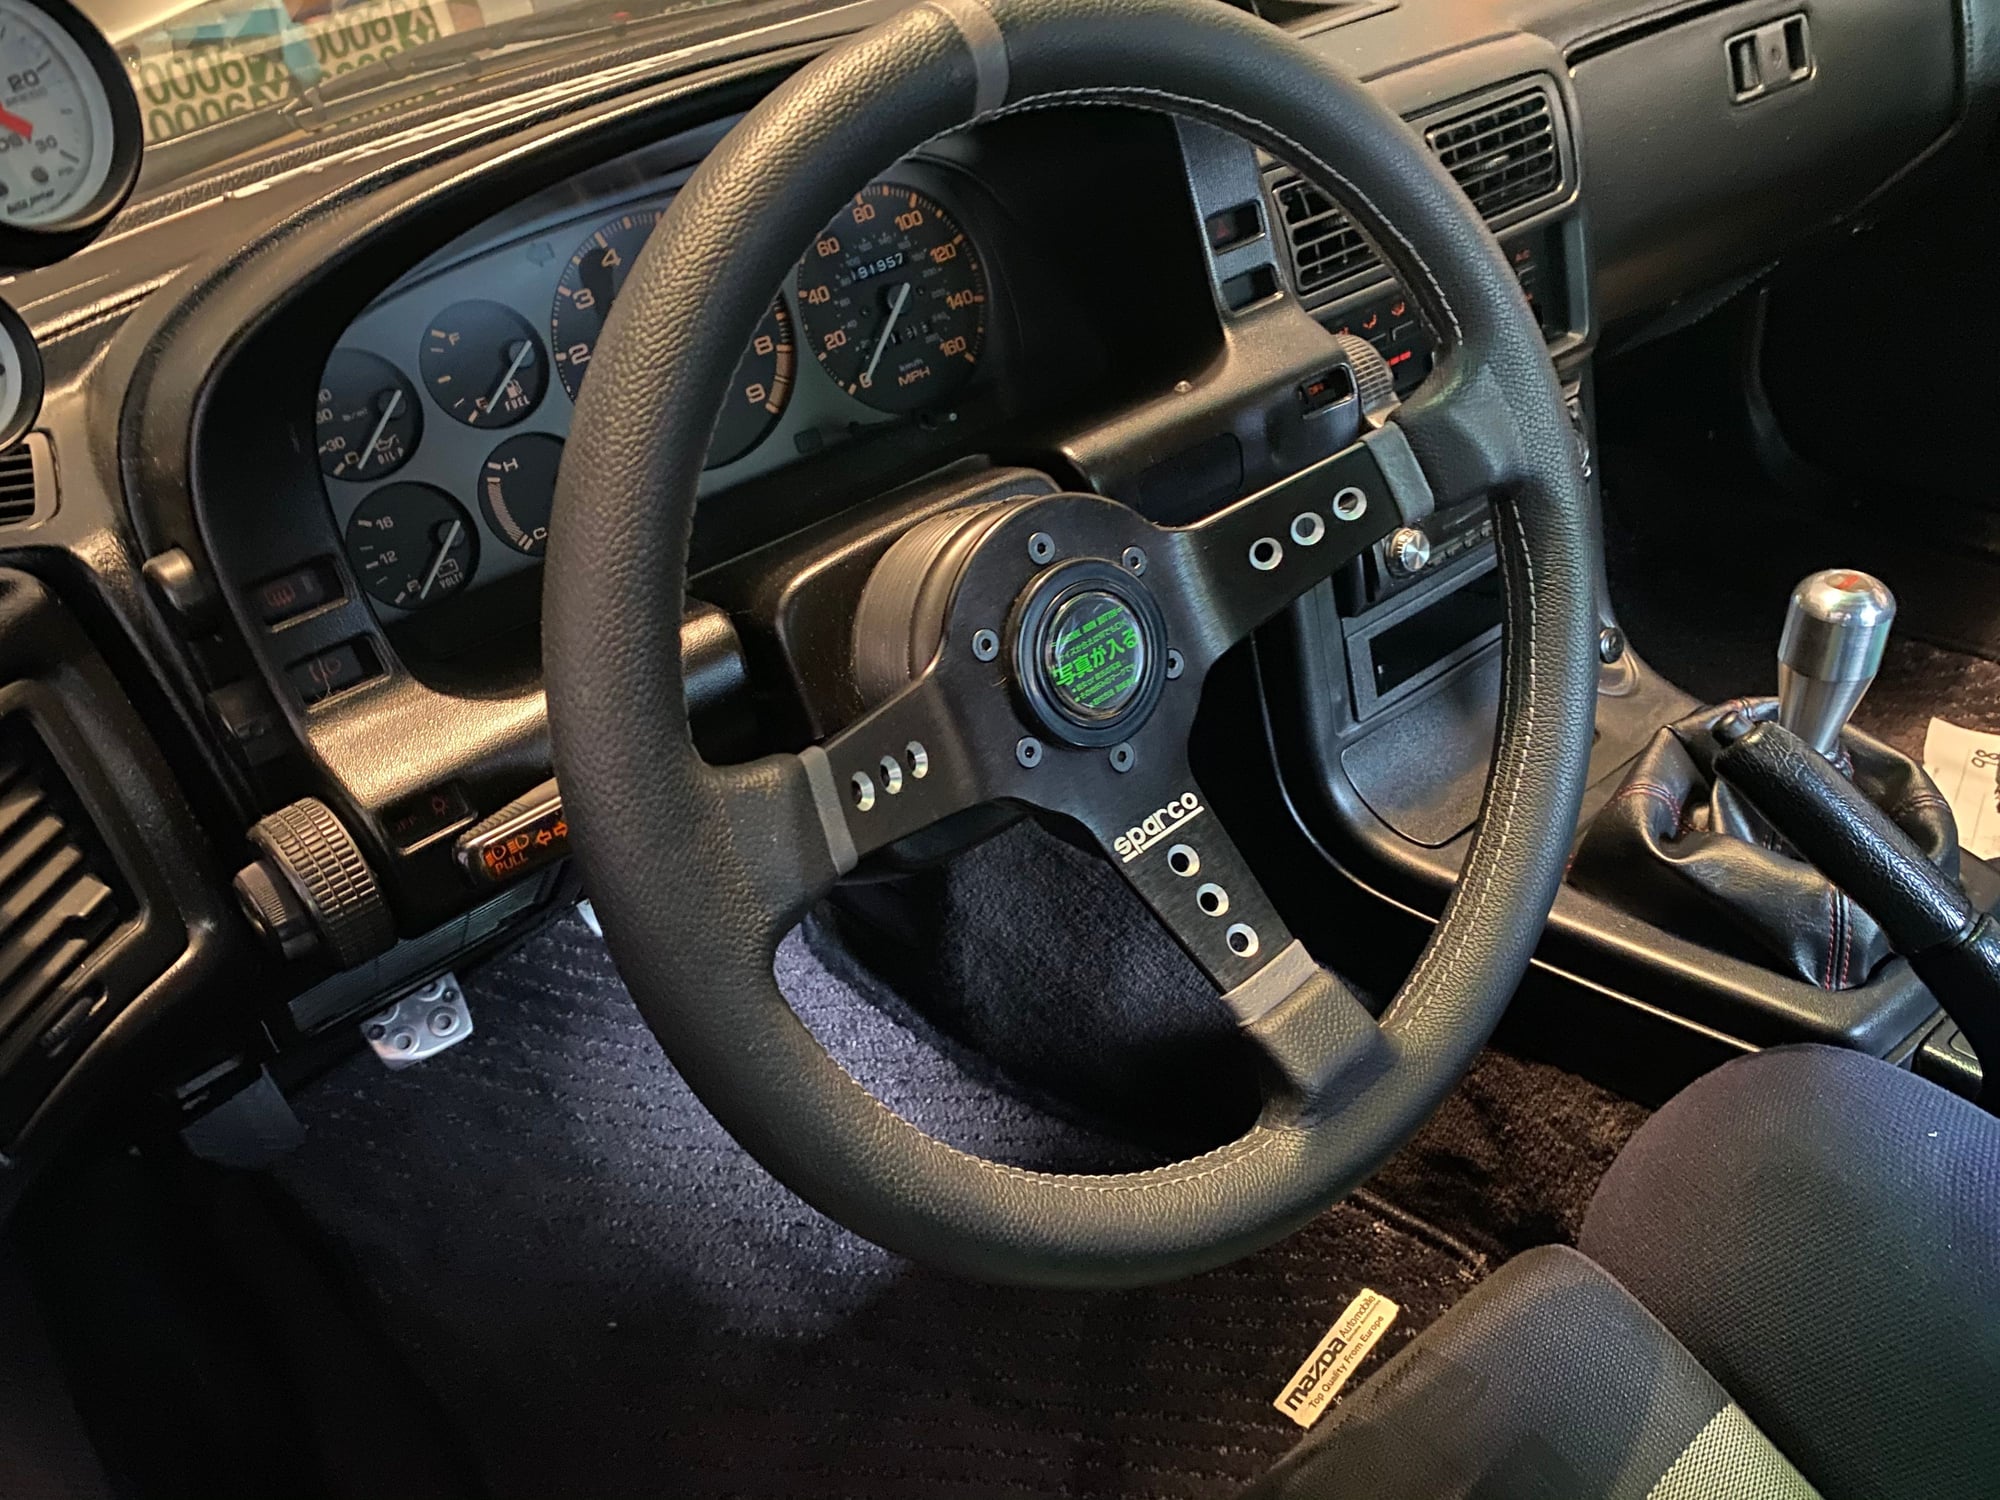 Accessories - Sparco steering wheel deep concave excellent condition comes with horn button no hub. - Used - 1986 to 1989 Mazda RX-7 - Prince Frederick, MD 20678, United States